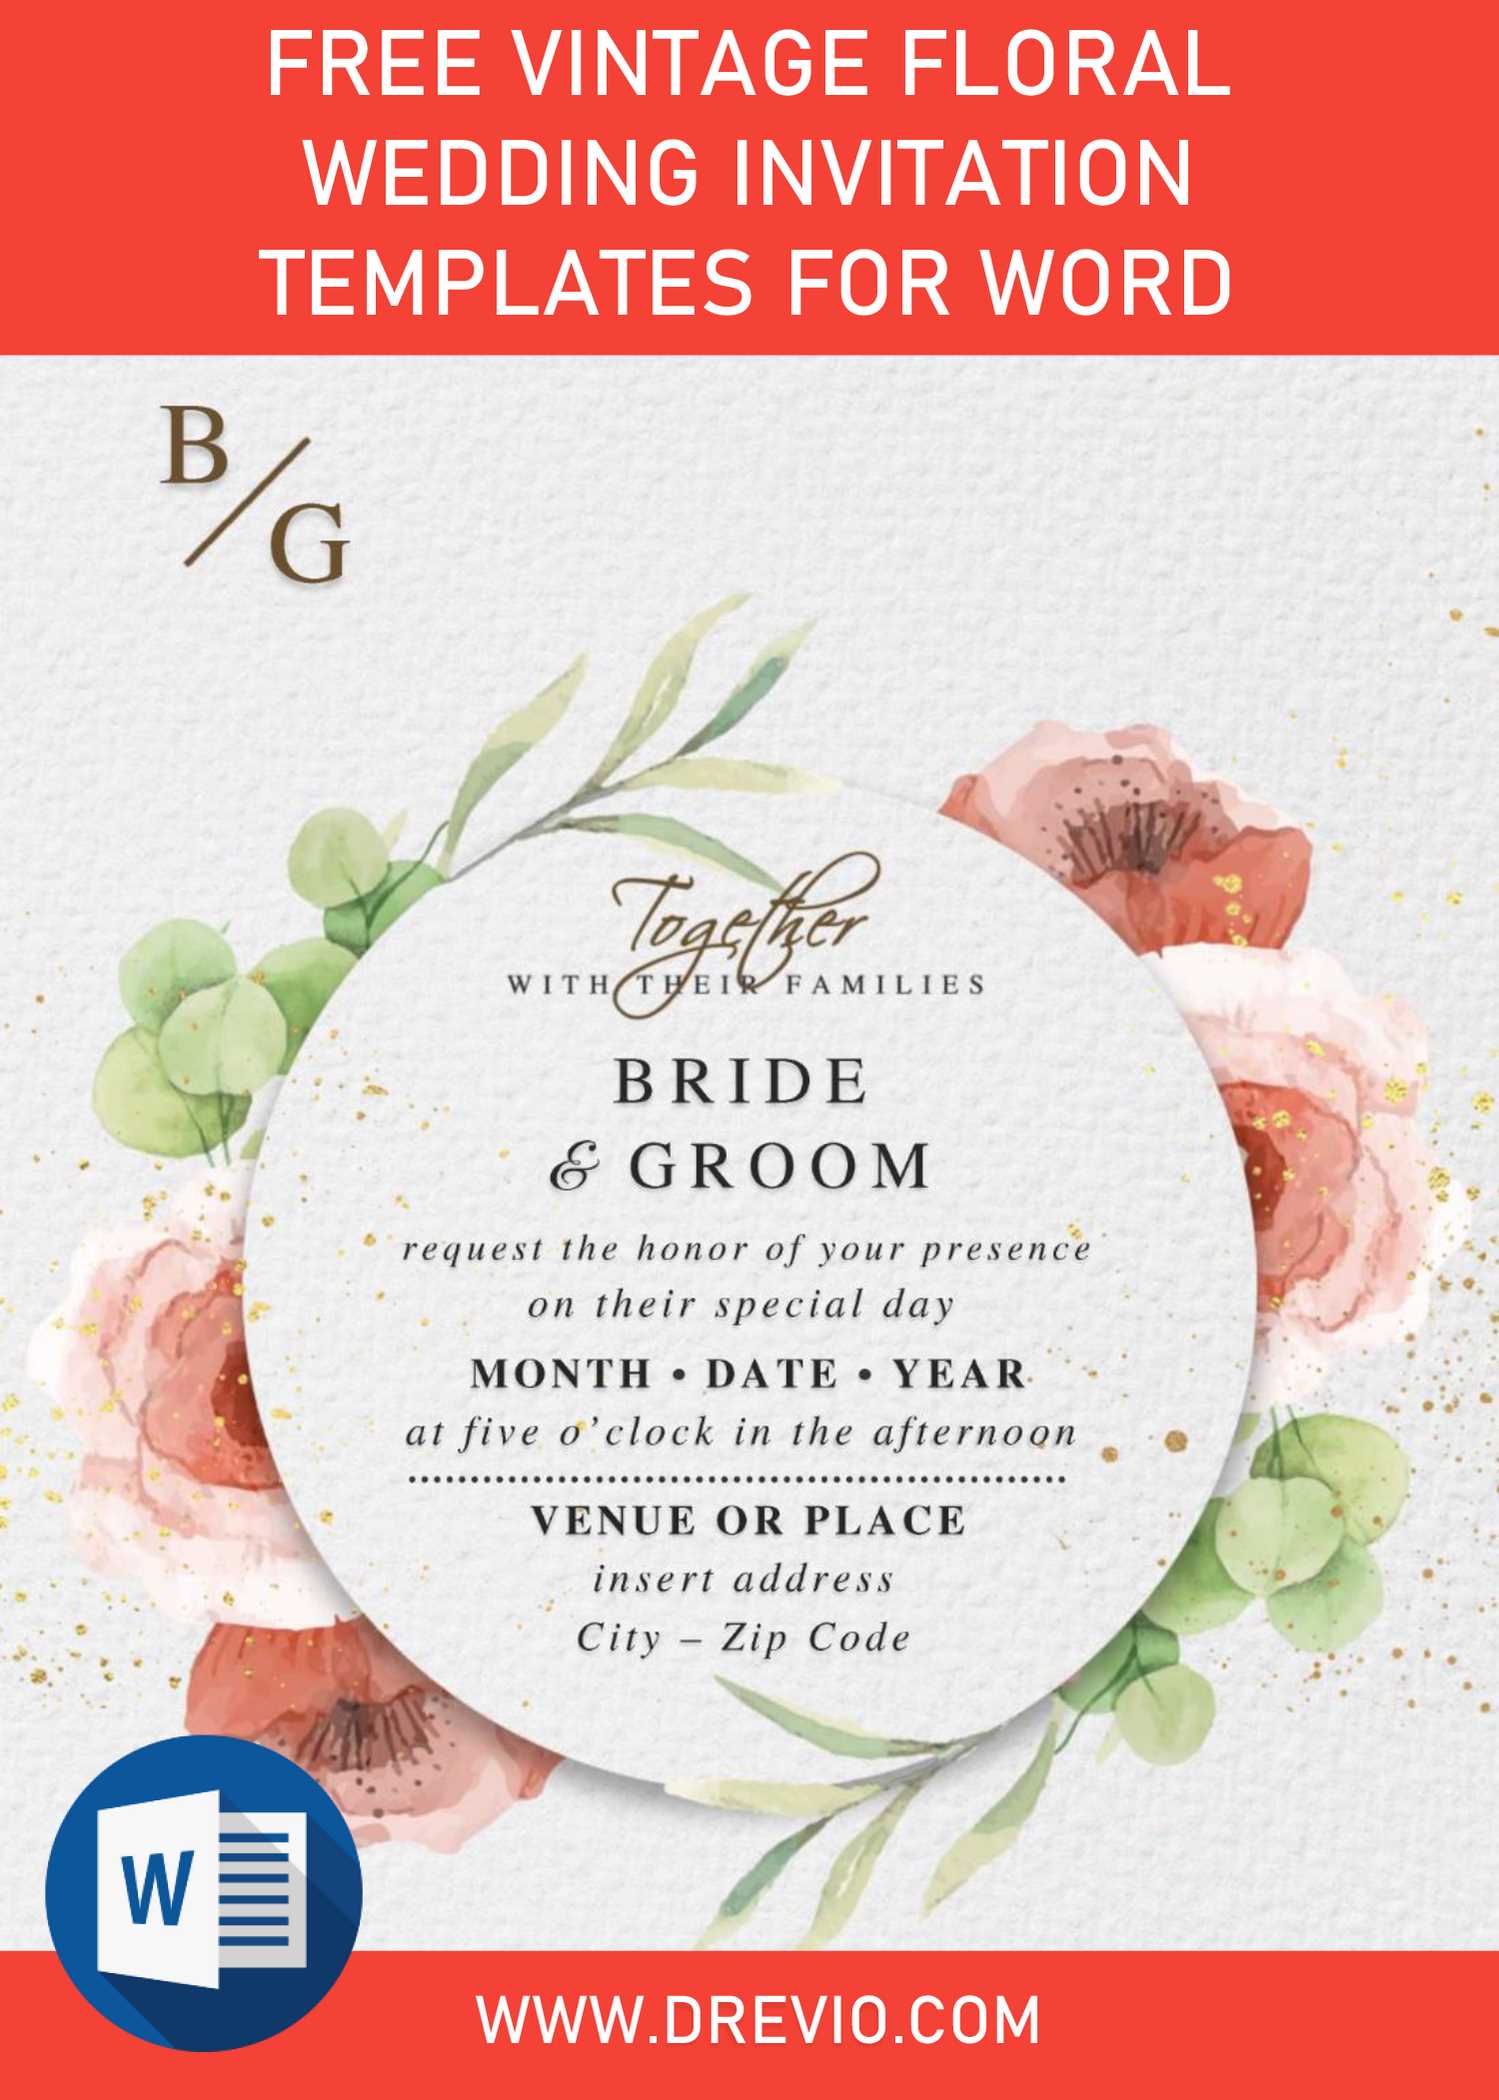 Free Vintage Floral Wedding Invitation Templates For Word